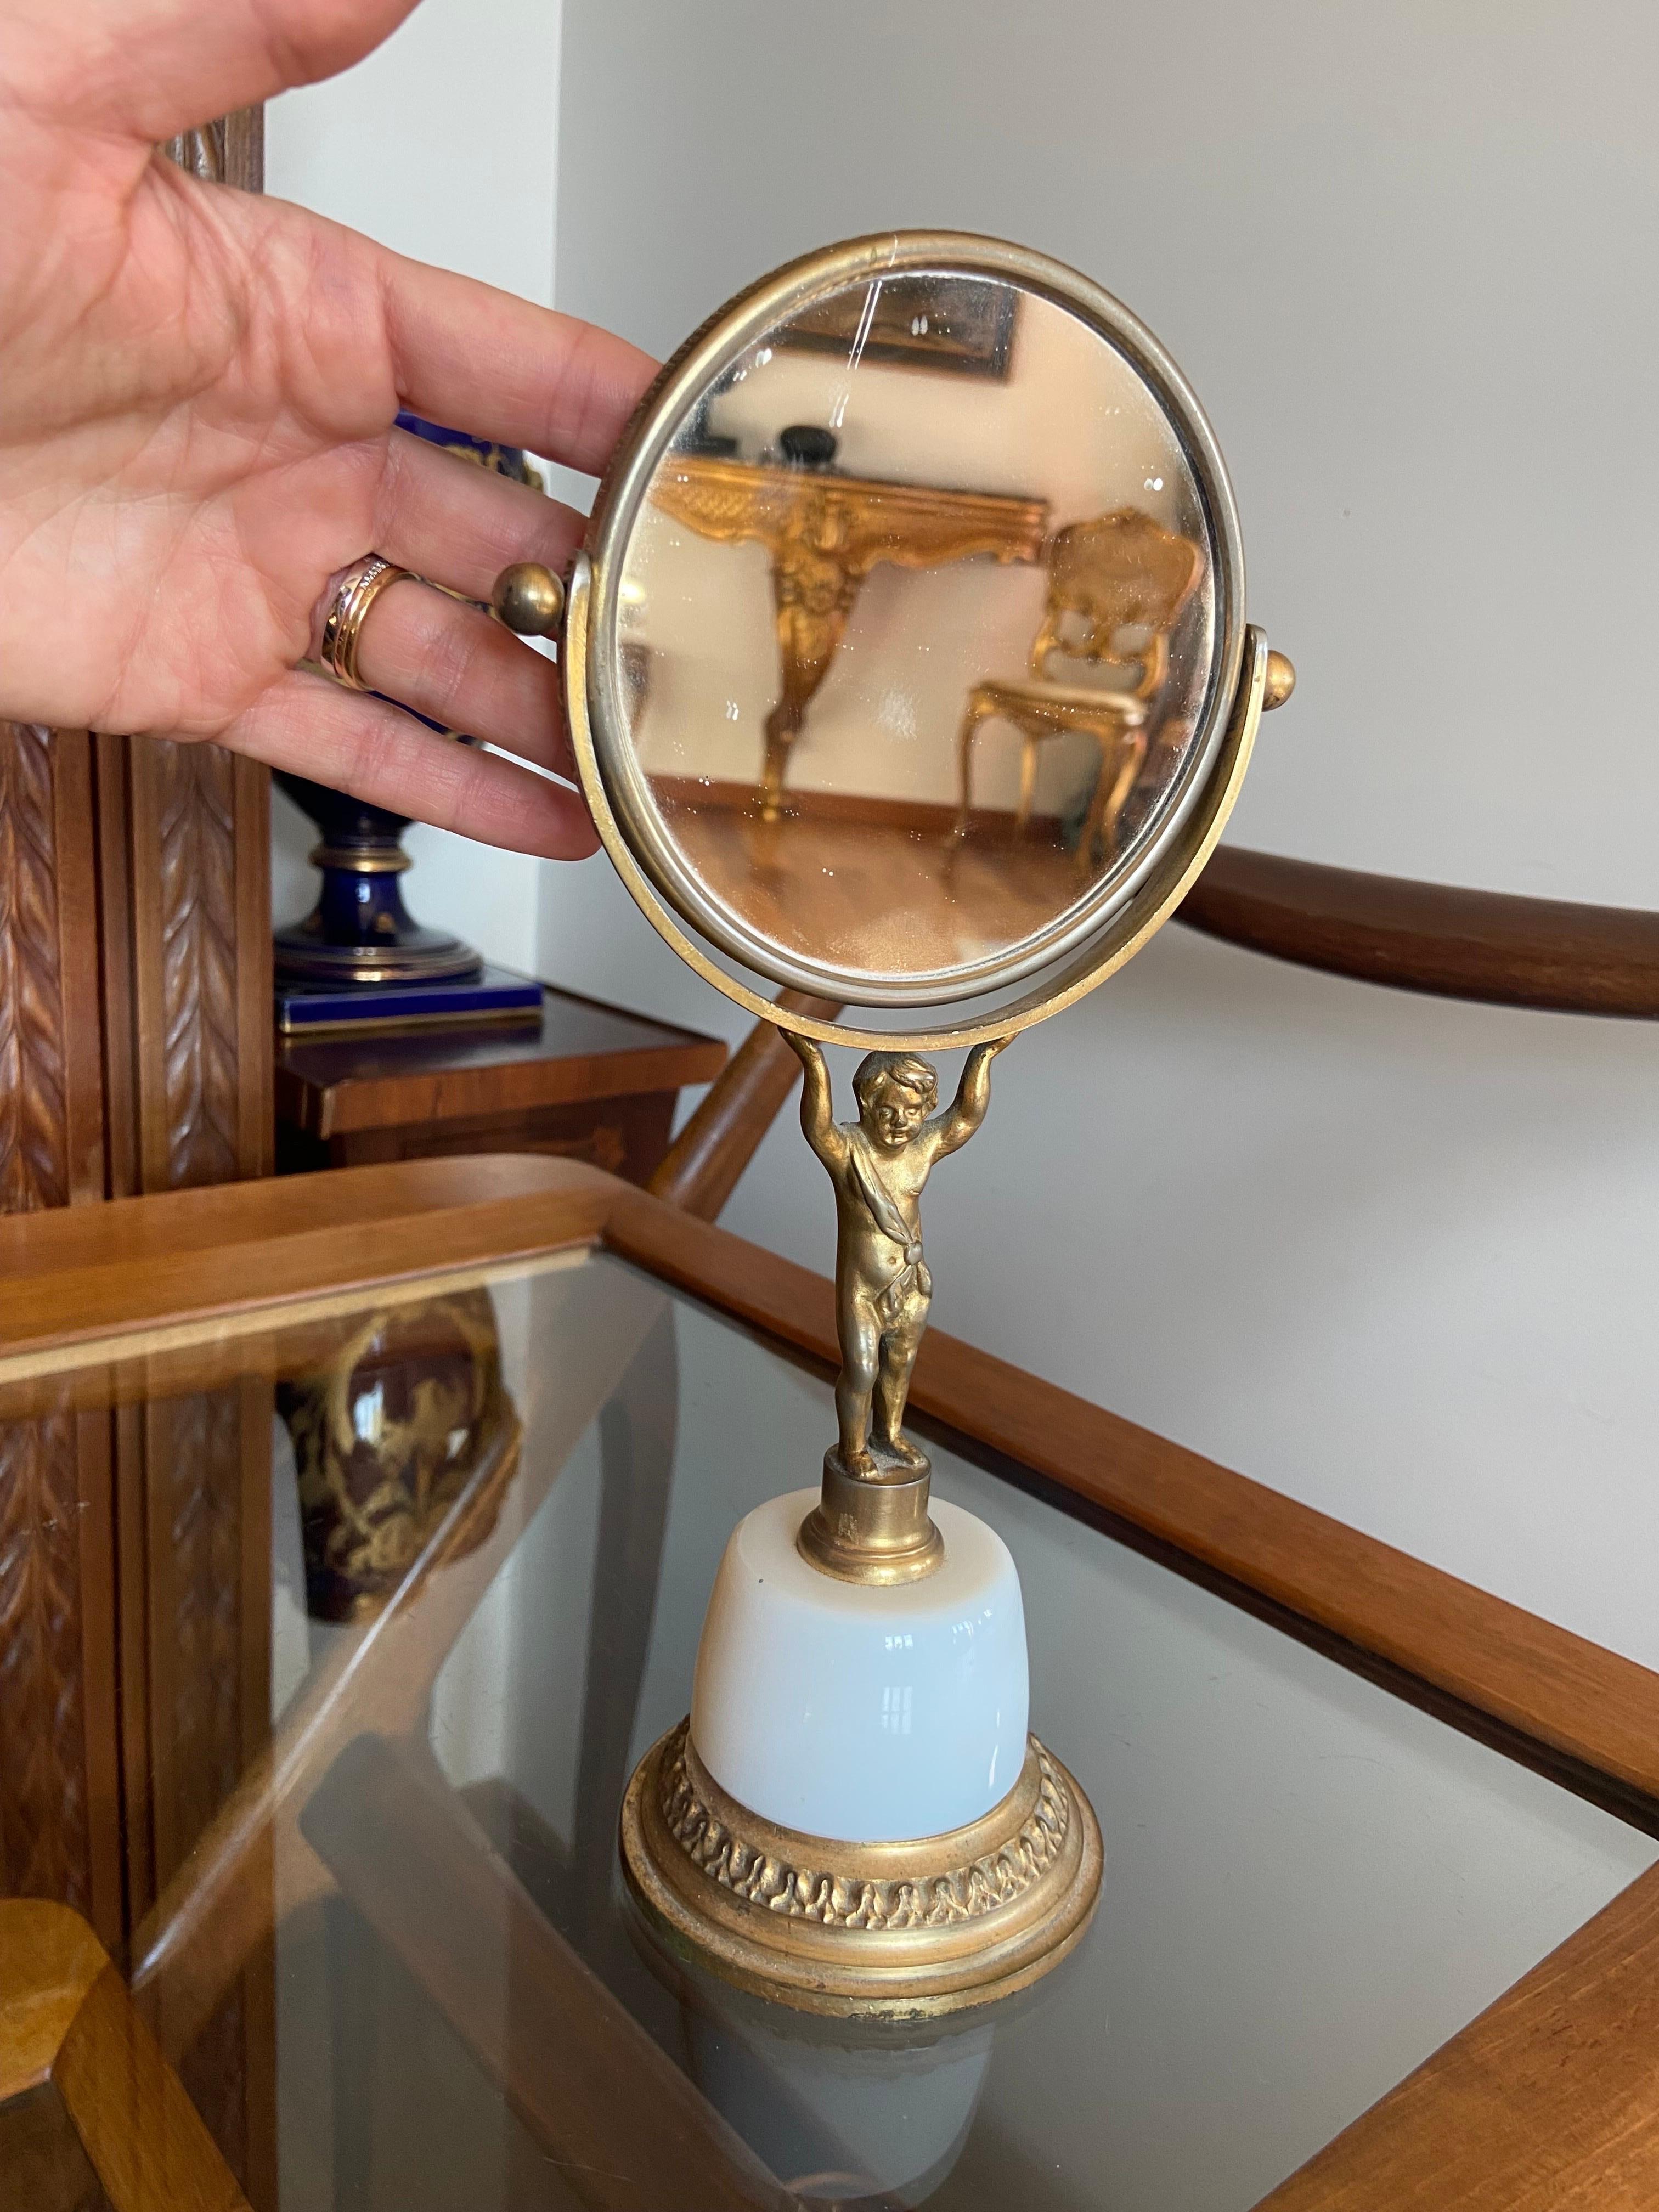 20th century gilded bronze double side table mirror decorated with a figure of a boy holding the mirror, which is resting on opaline base.
France, circa 1930.